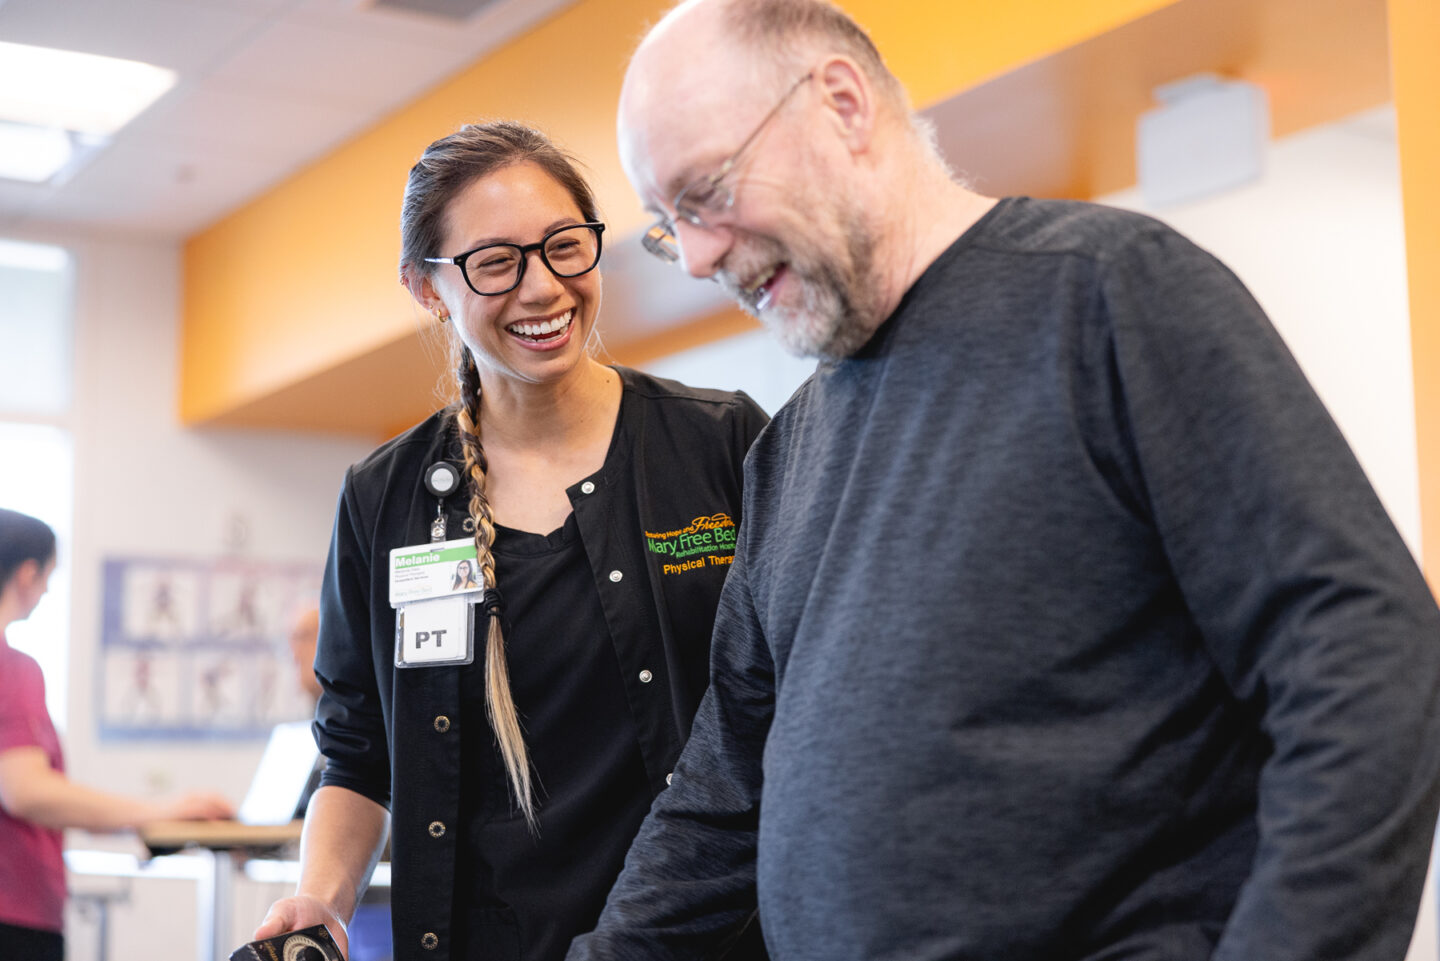 Physical therapist smiling and assisting an older adult during a fall prevention session.